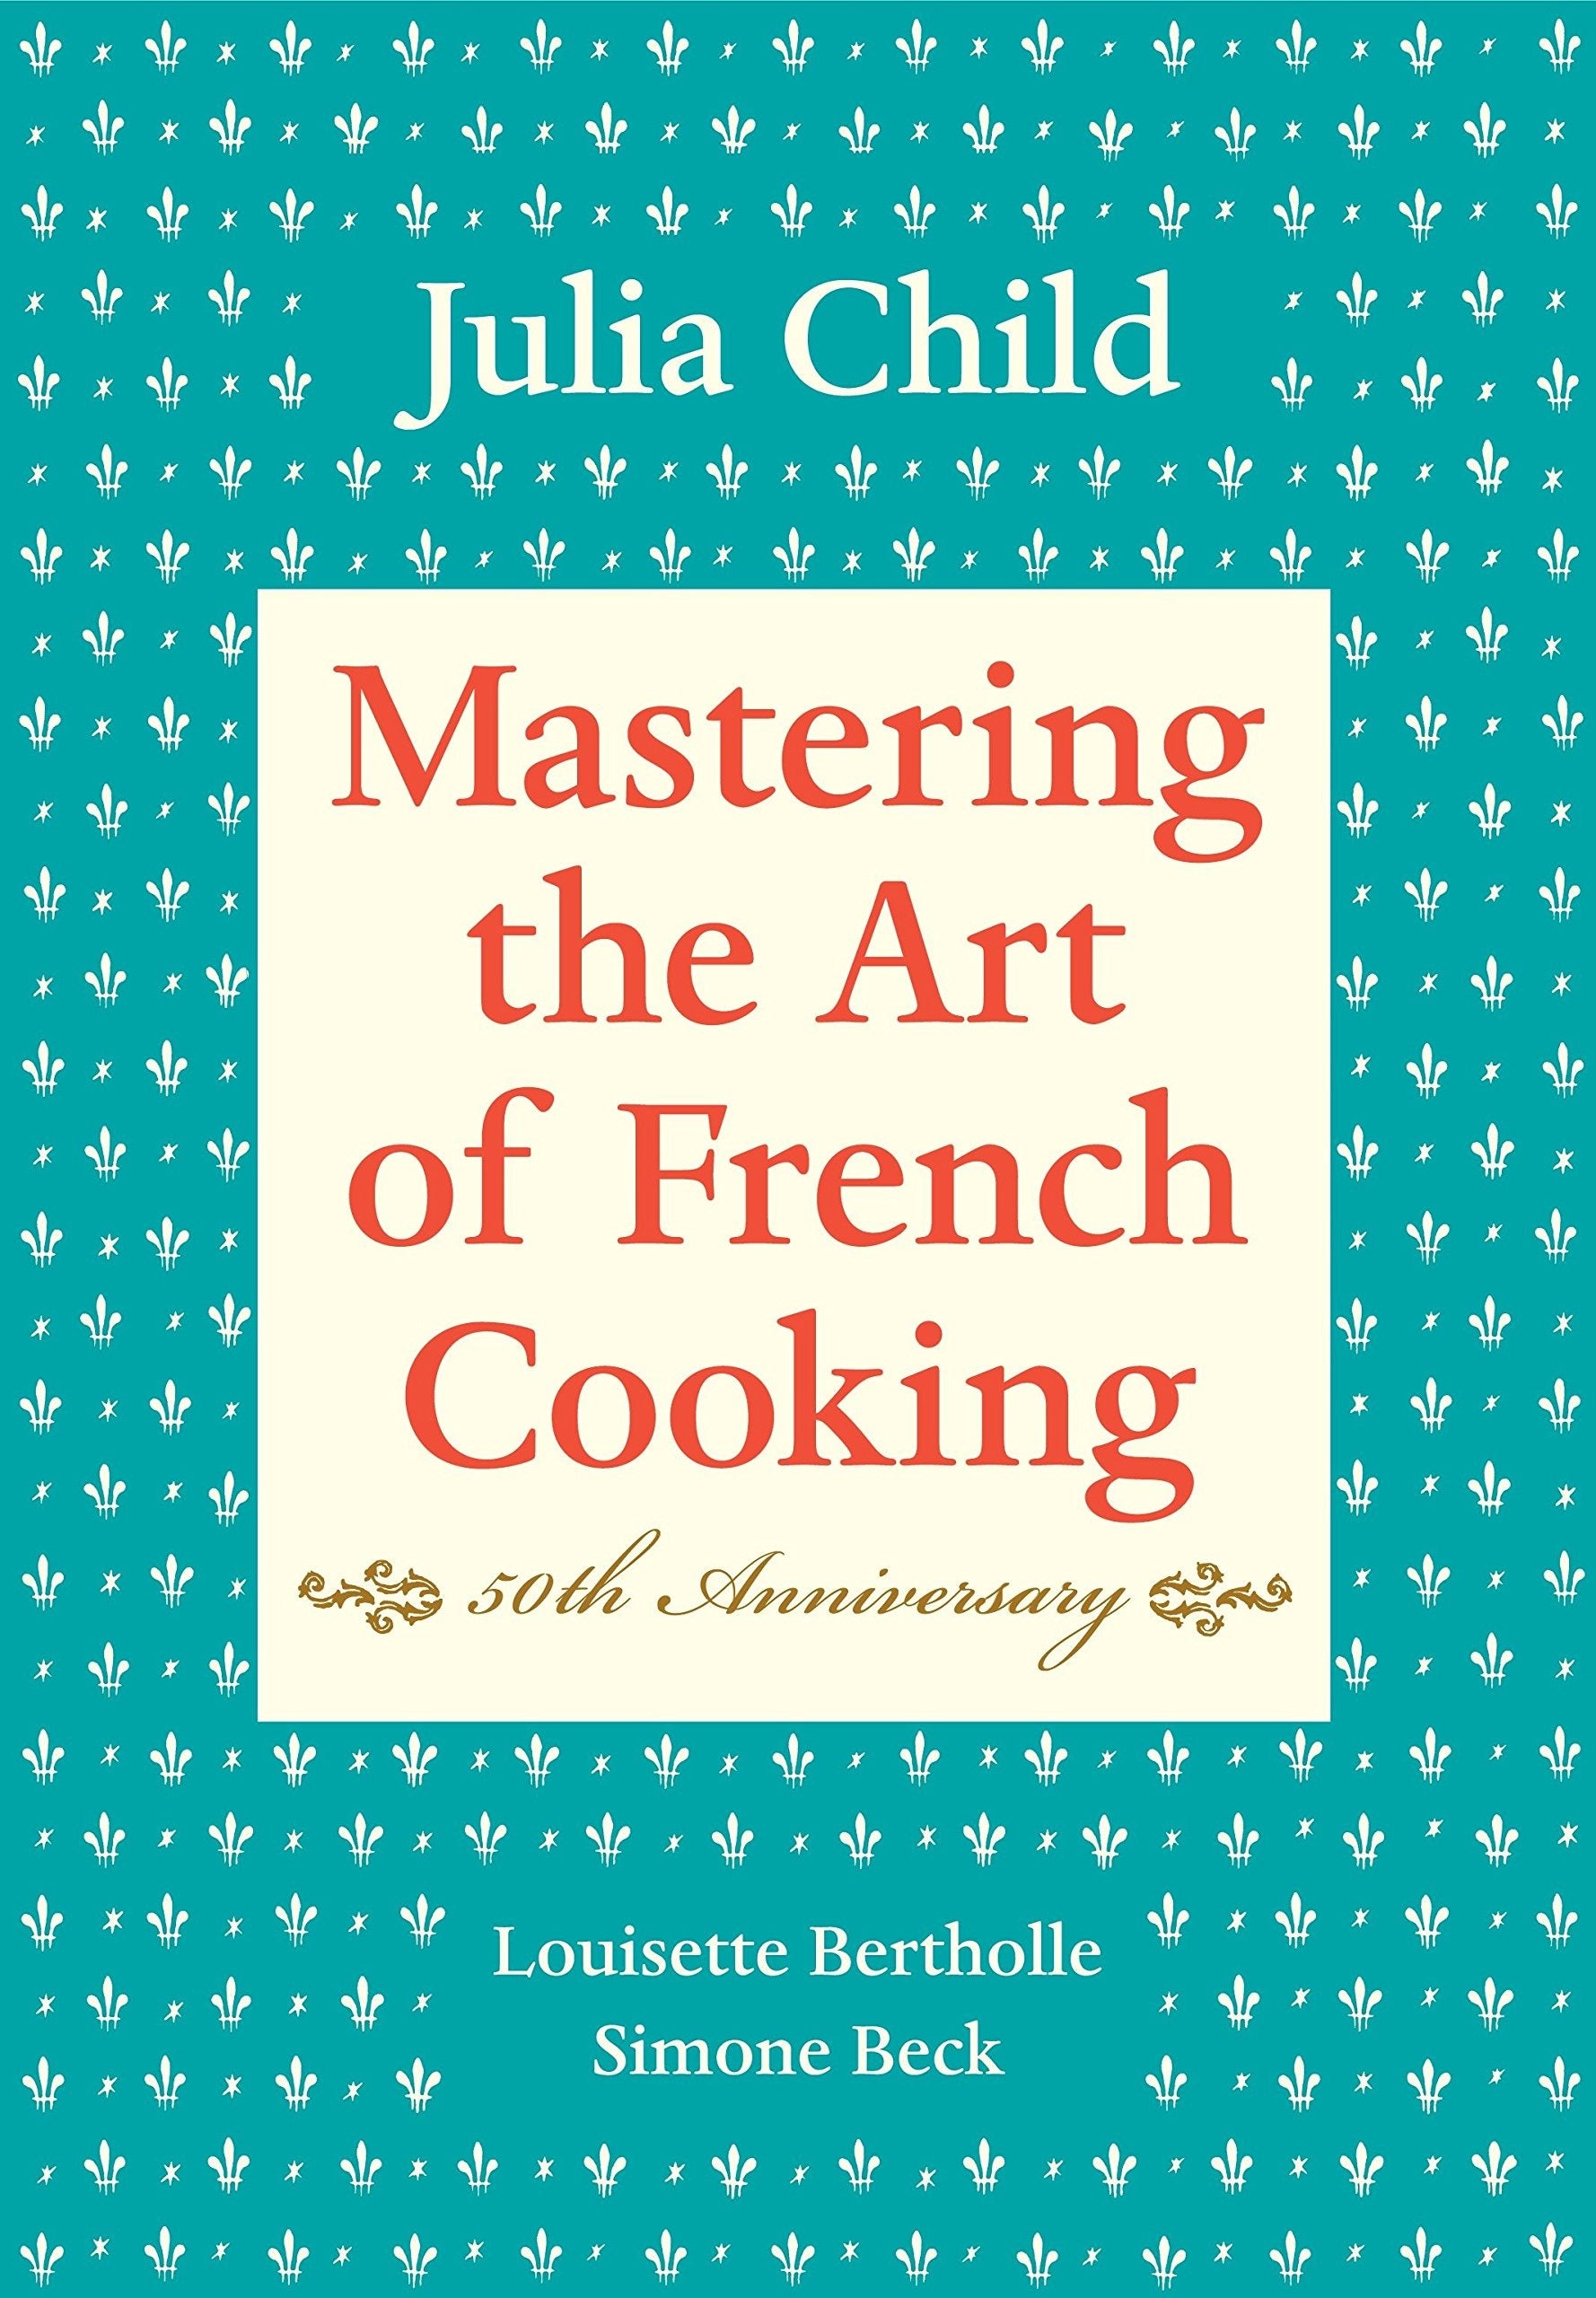 the green Mastering the Art of French Cooking cover with red lettering